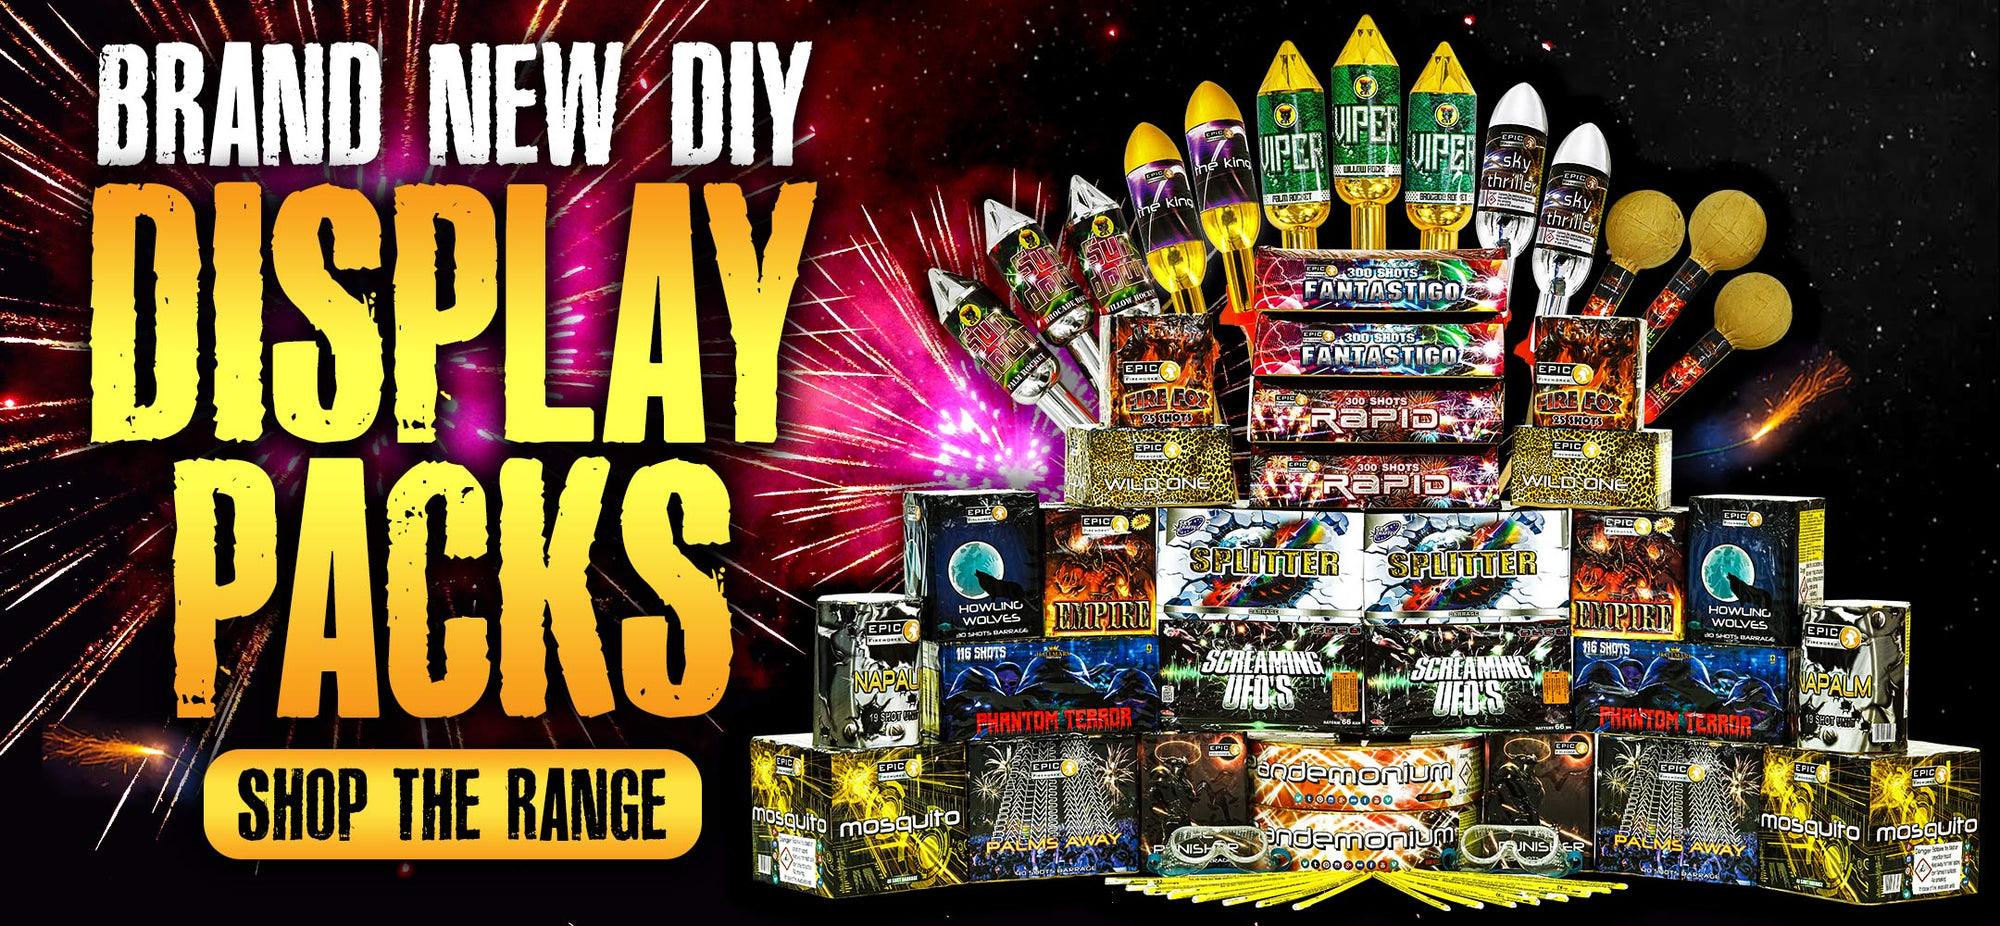 Image of a huge pile of fireworks including barrages and rockets. Text on the image reads 'brand new DIY display packs, shop the range.'